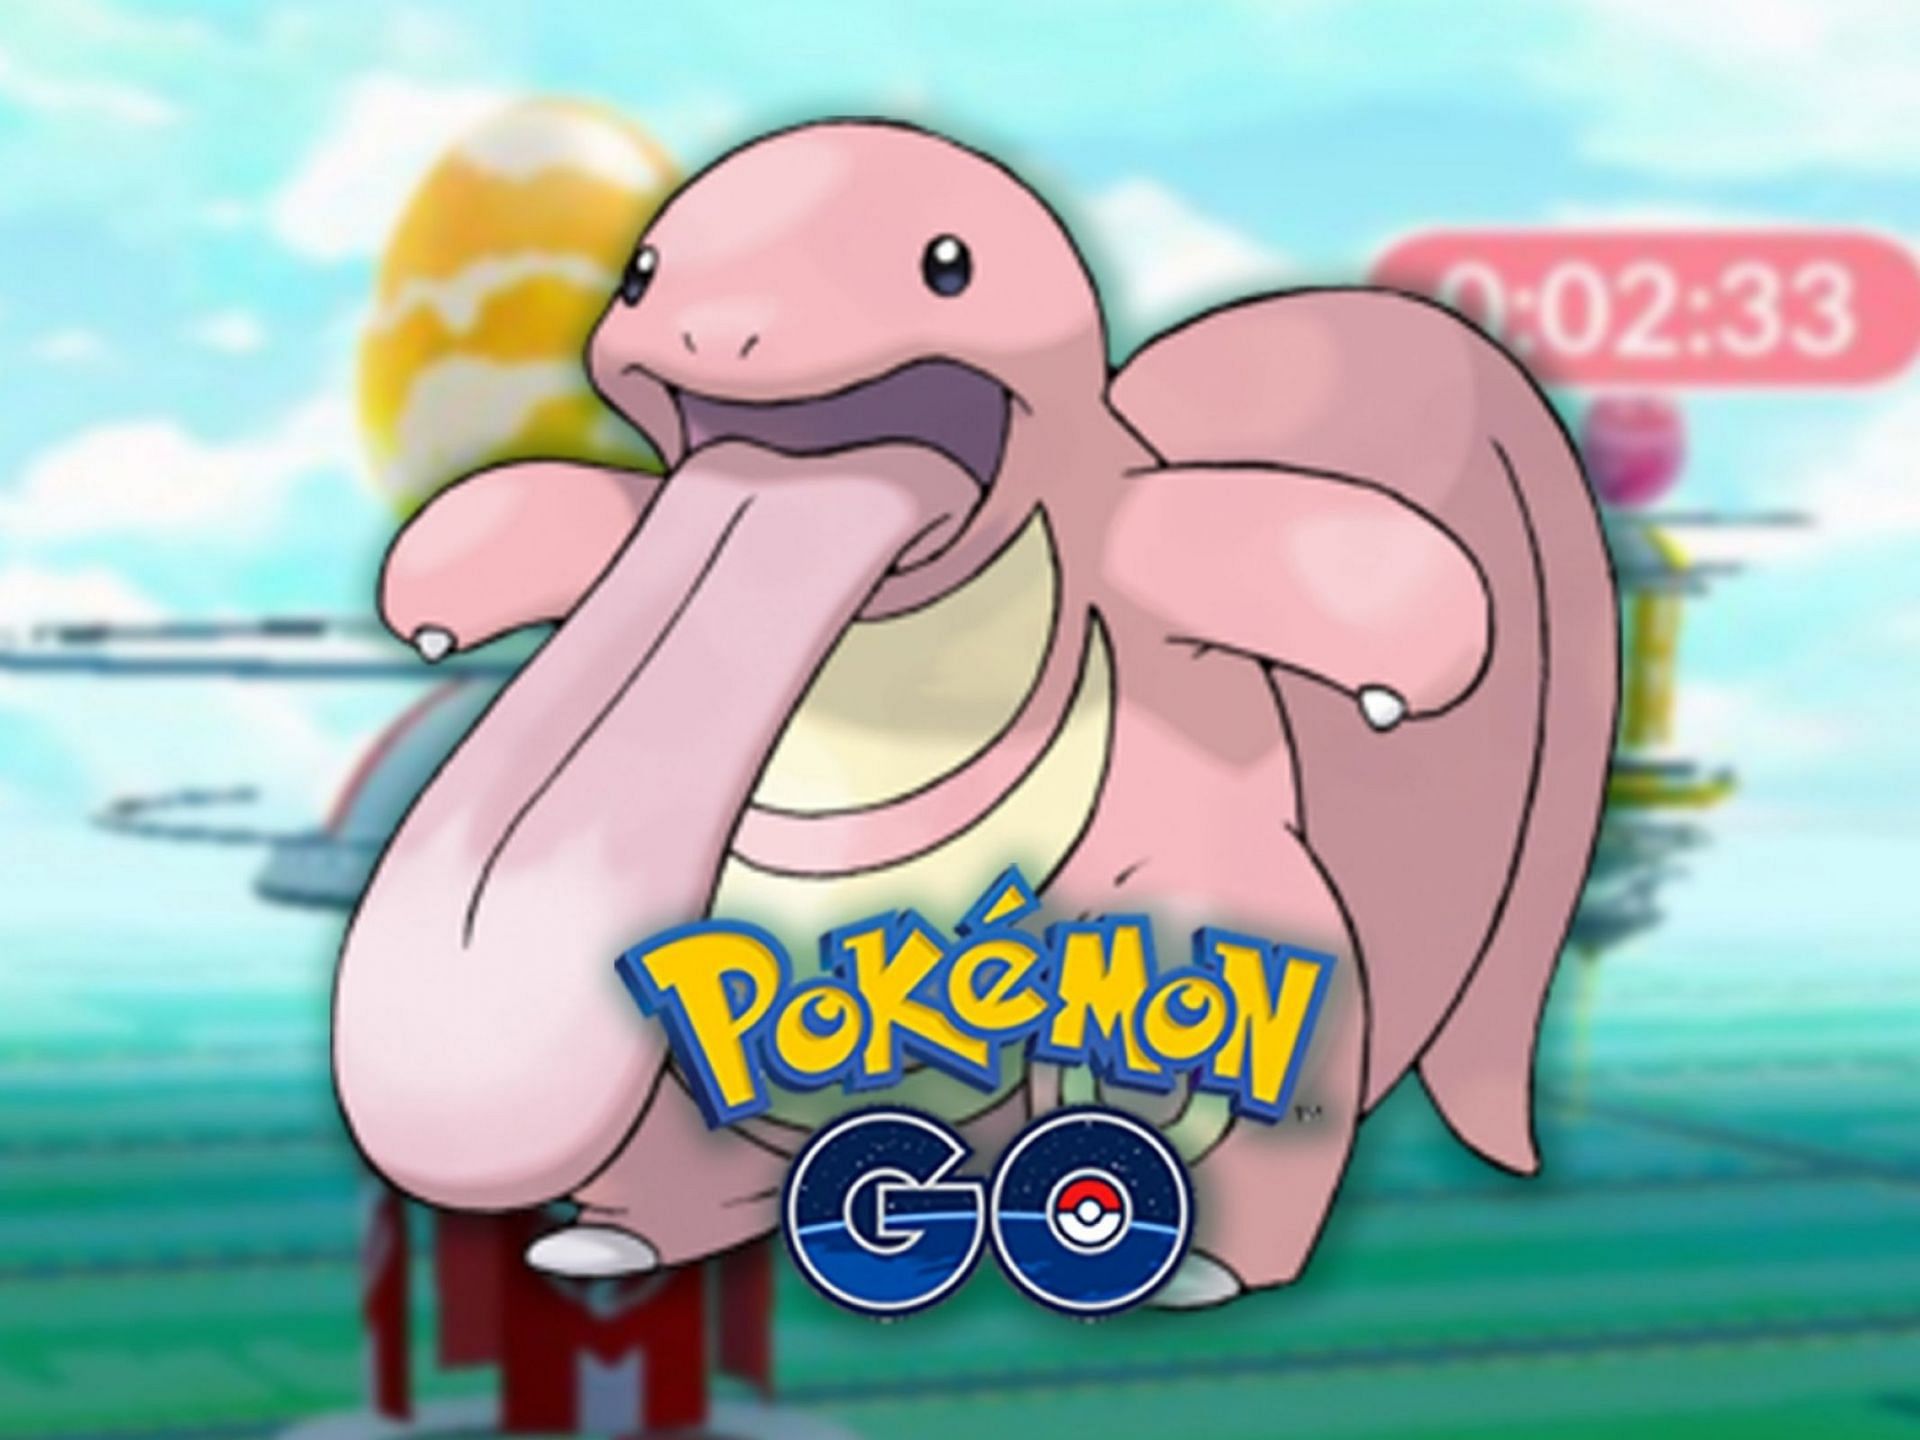 Pokemon Lickitung weaknesses and best counters in 2022